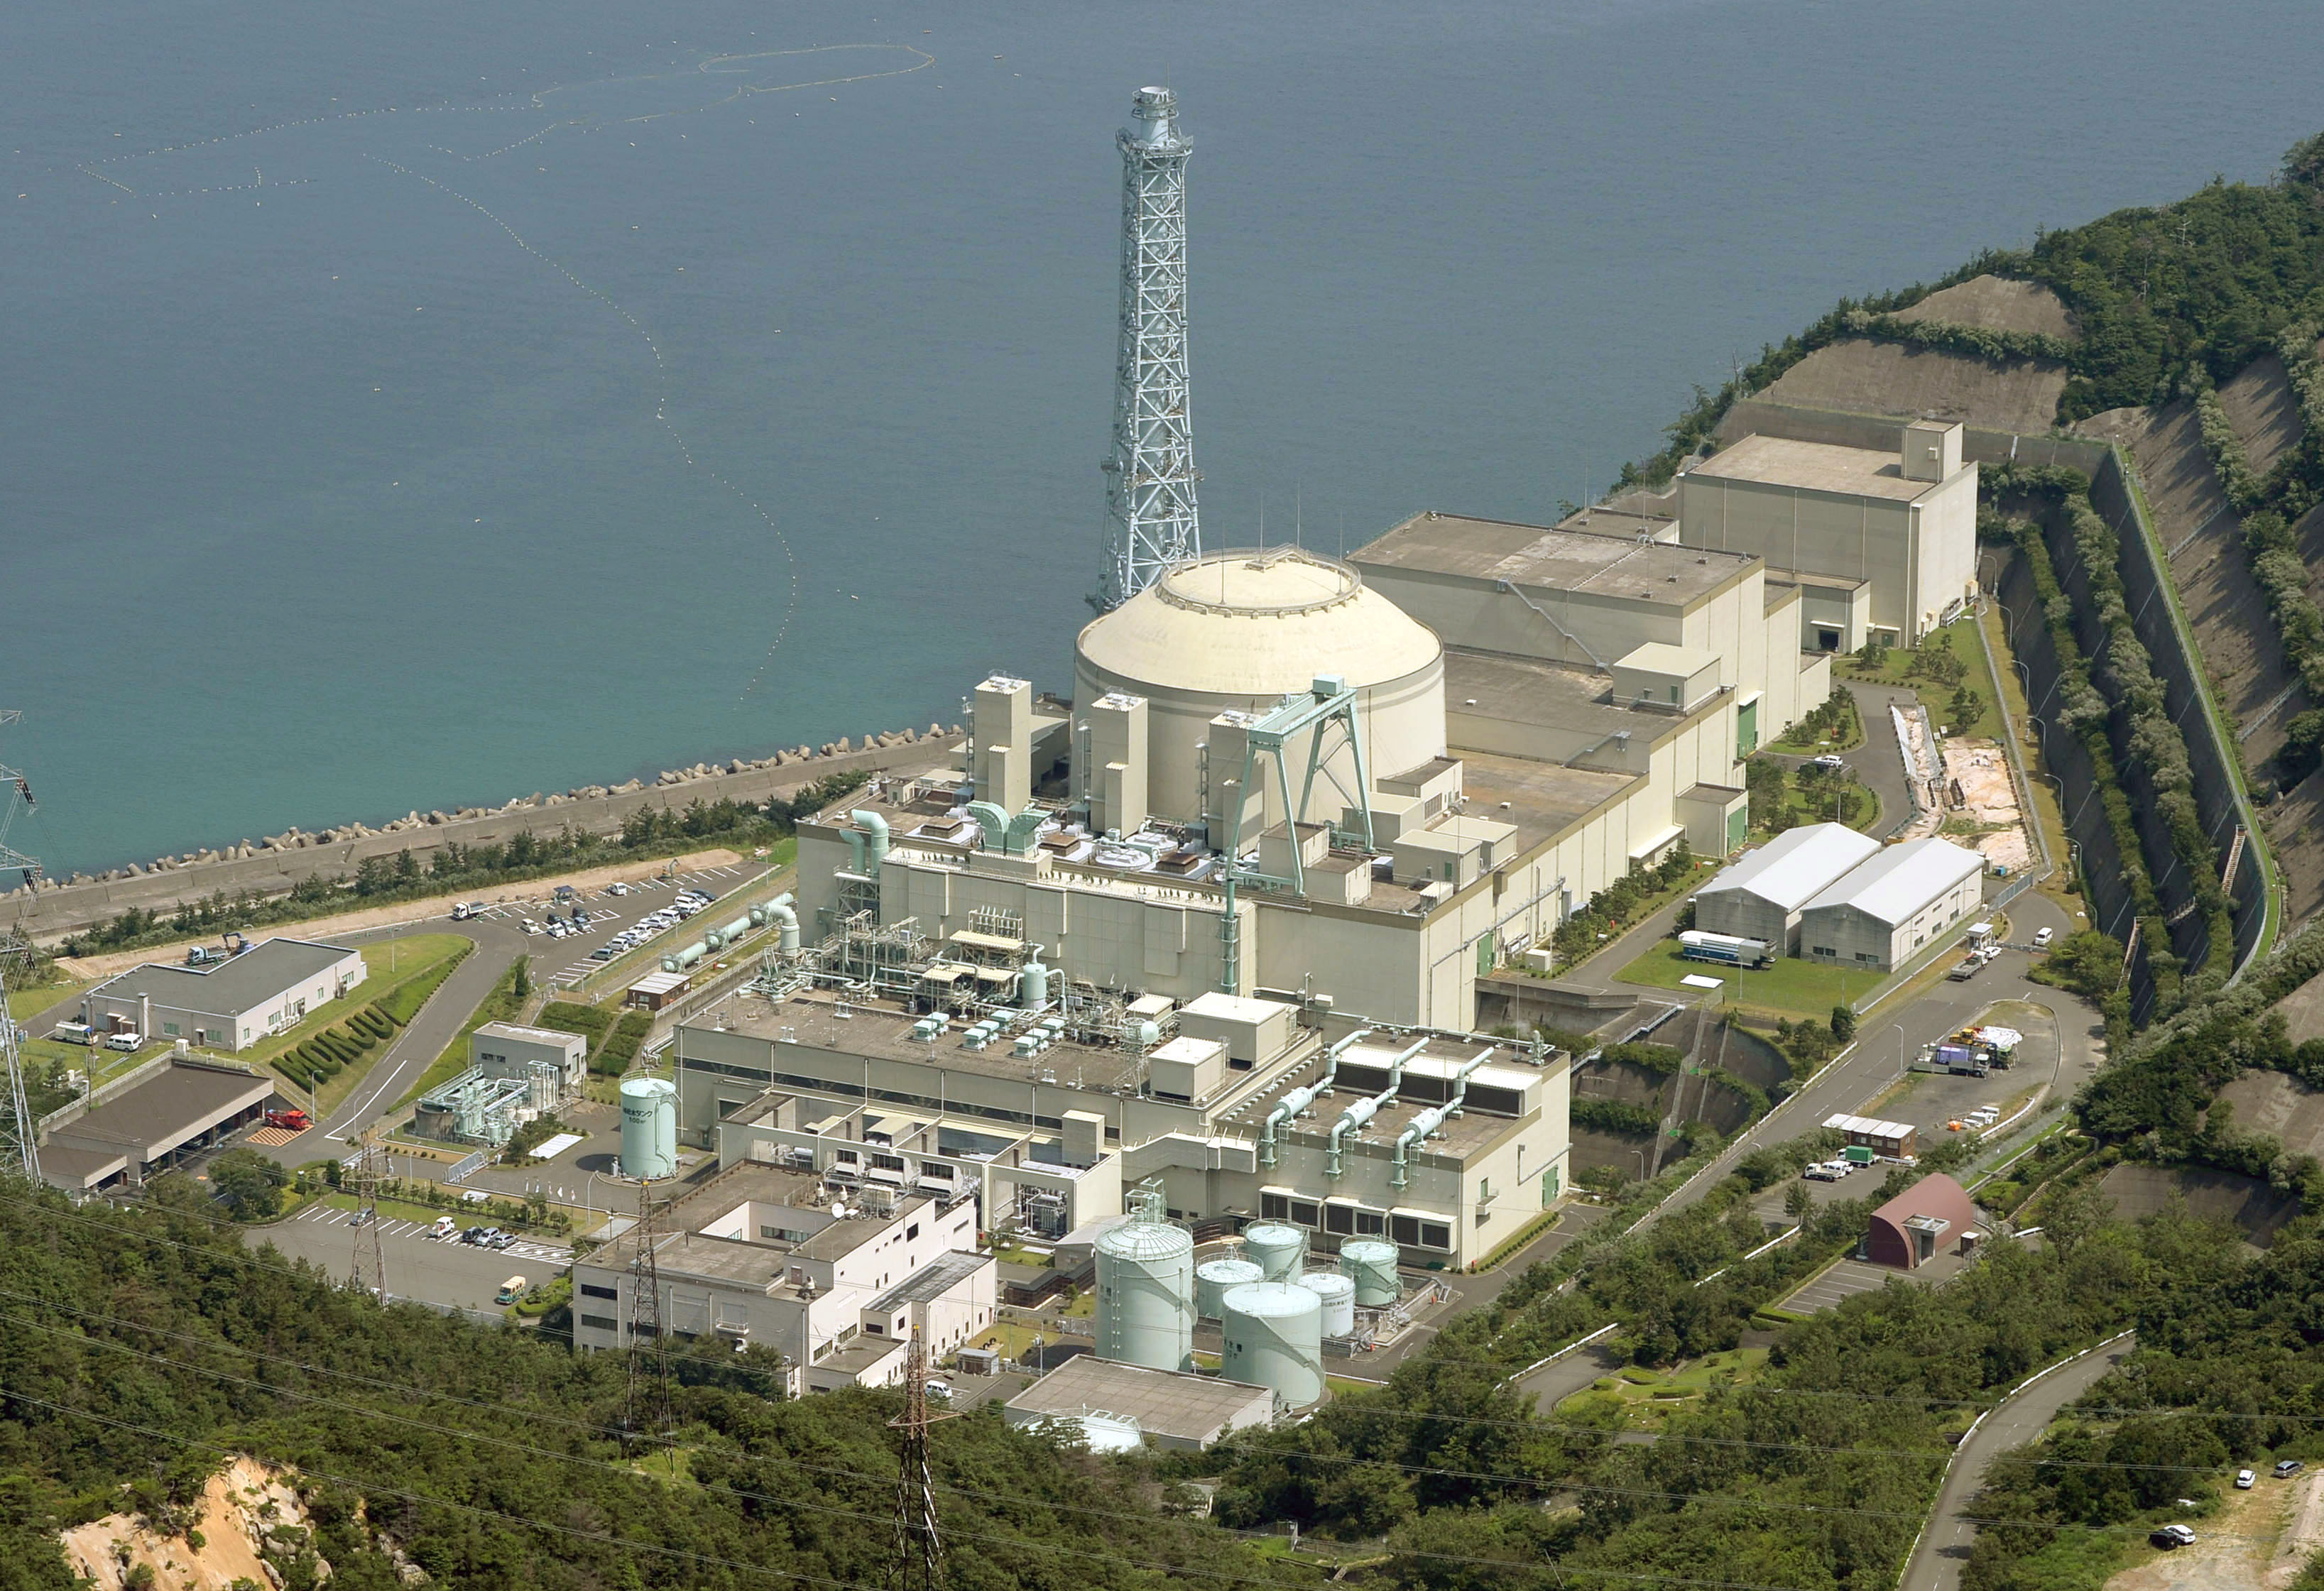 Trouble-plagued: The Nuclear Regulation Authority on Wednesday admonished the Japan Atomic Energy Agency for its lax security at the Monju prototype fast-breeder reactor in Tsuruga, Fukui Prefecture | KYODO